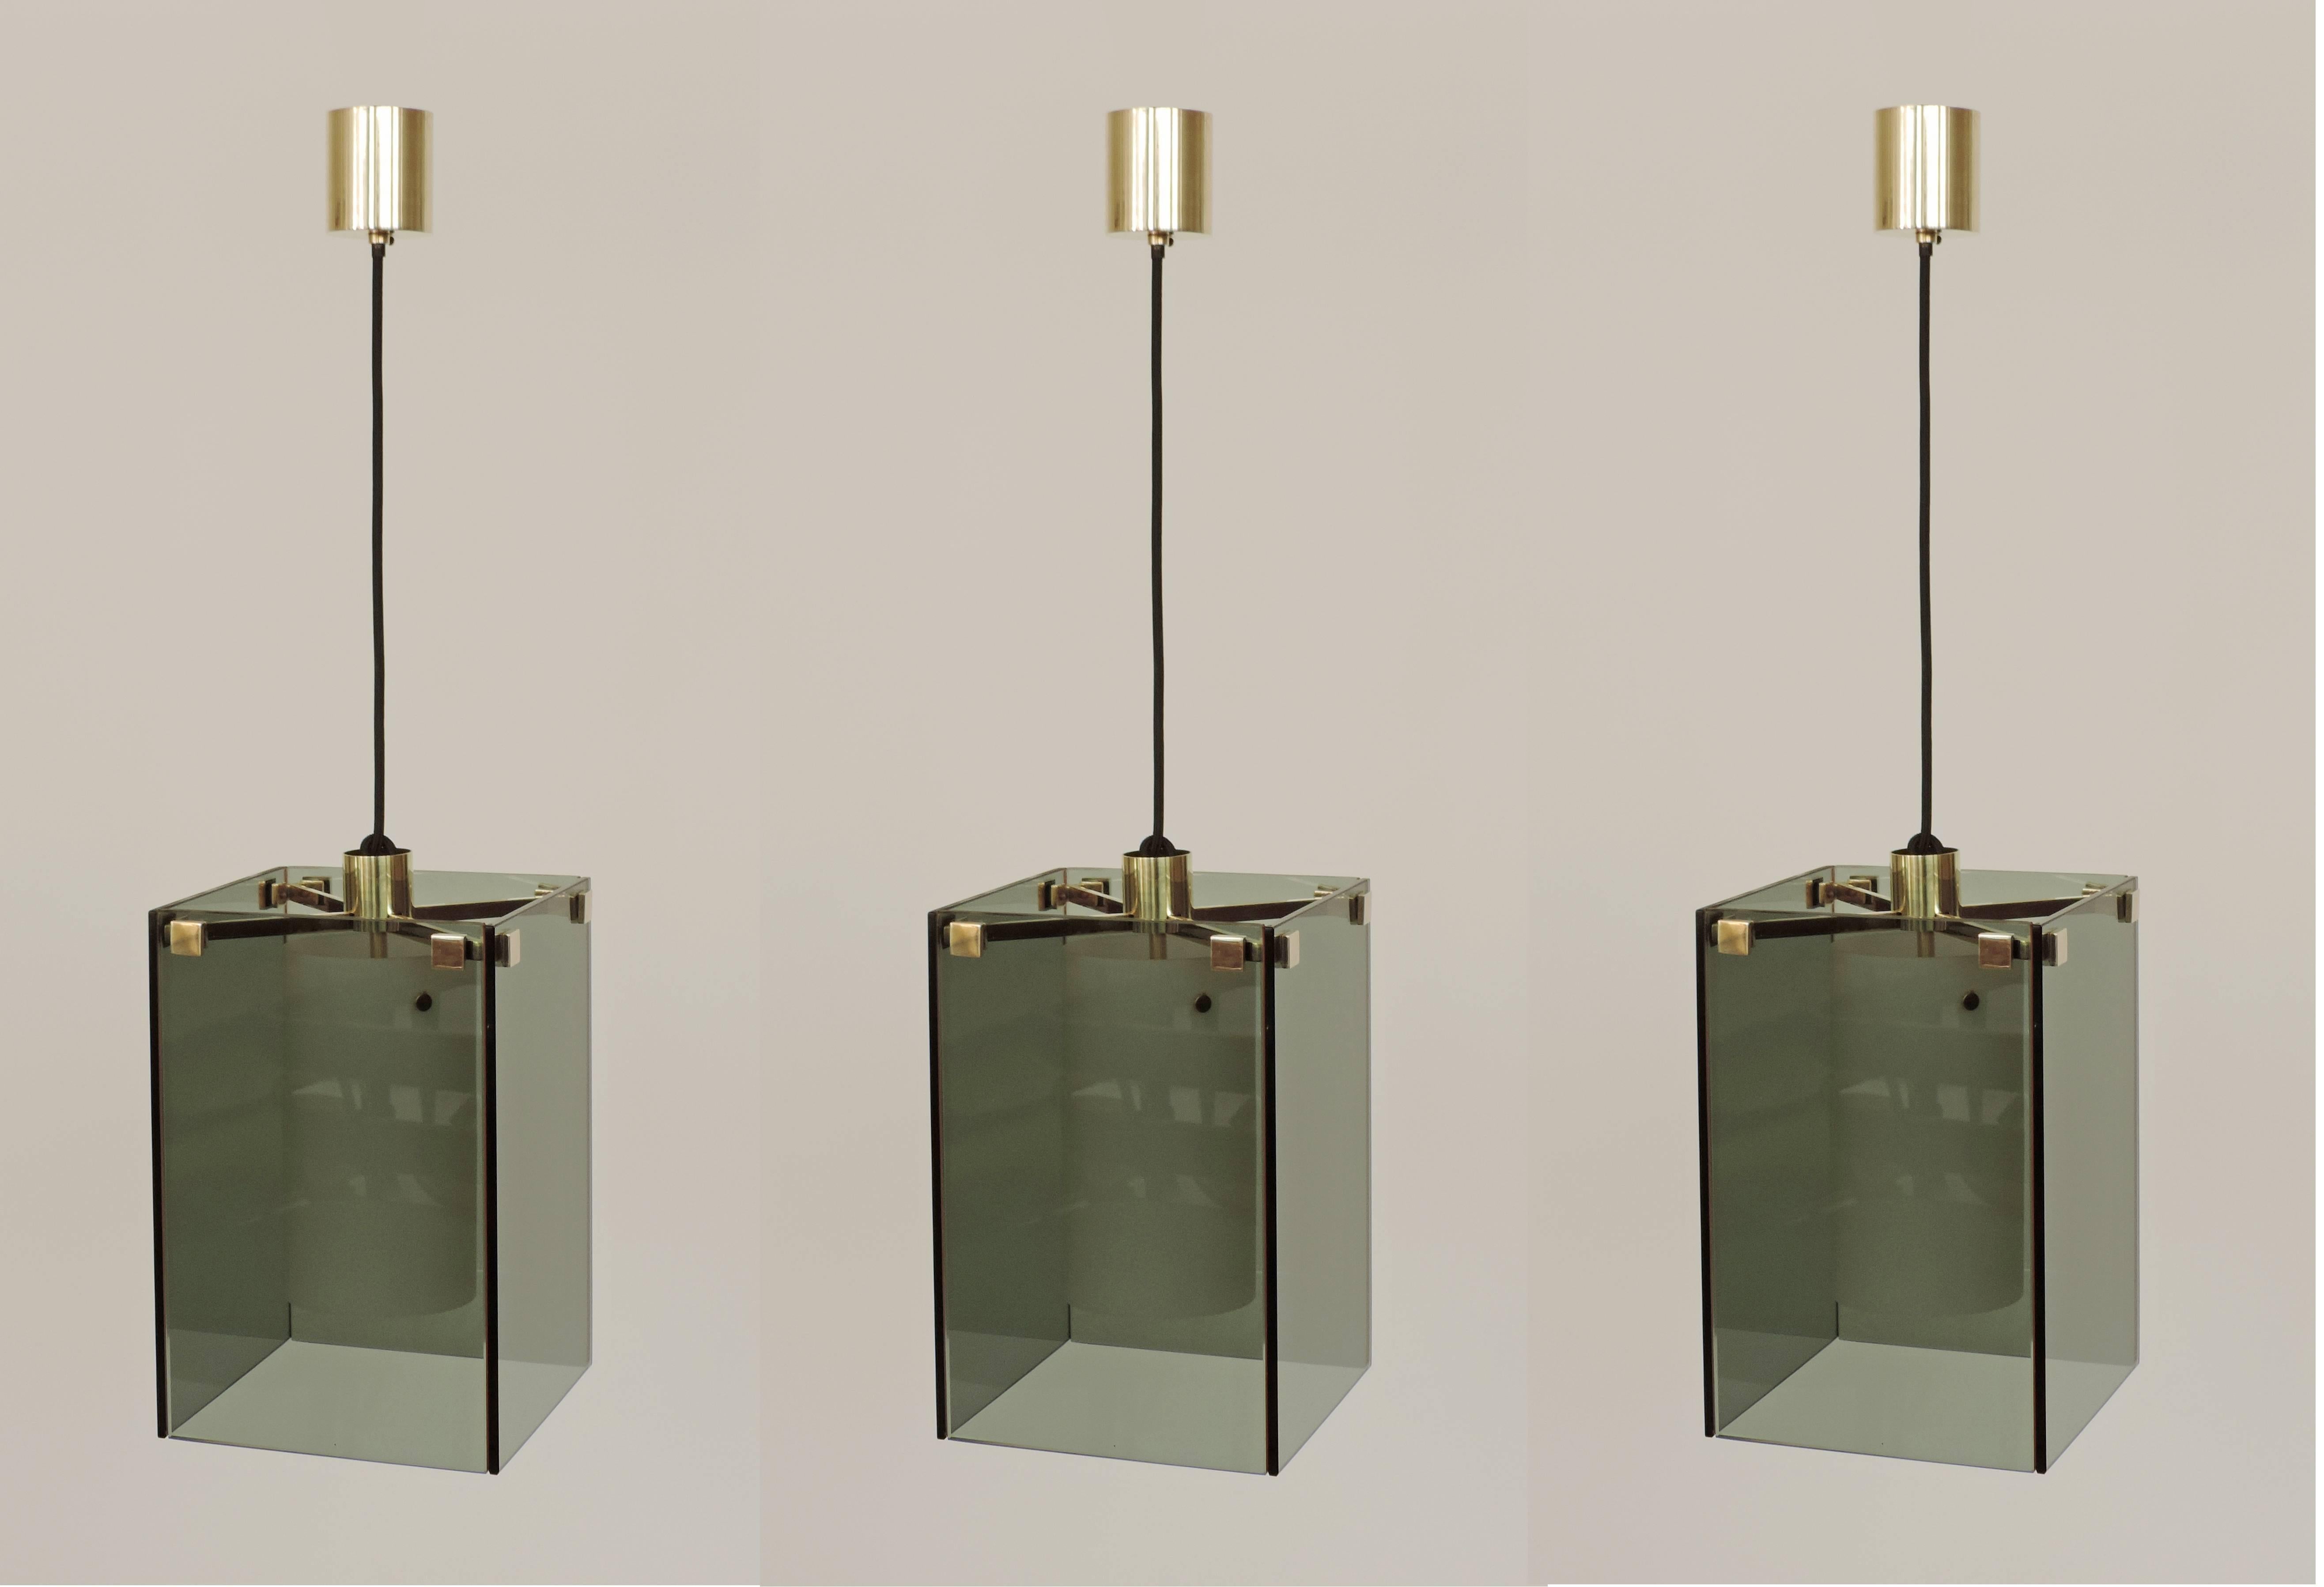 Splendid Max Ingrand set of three Mod. 2211 ceiling lamps for Fontana Arte.
Fully repolished brass.